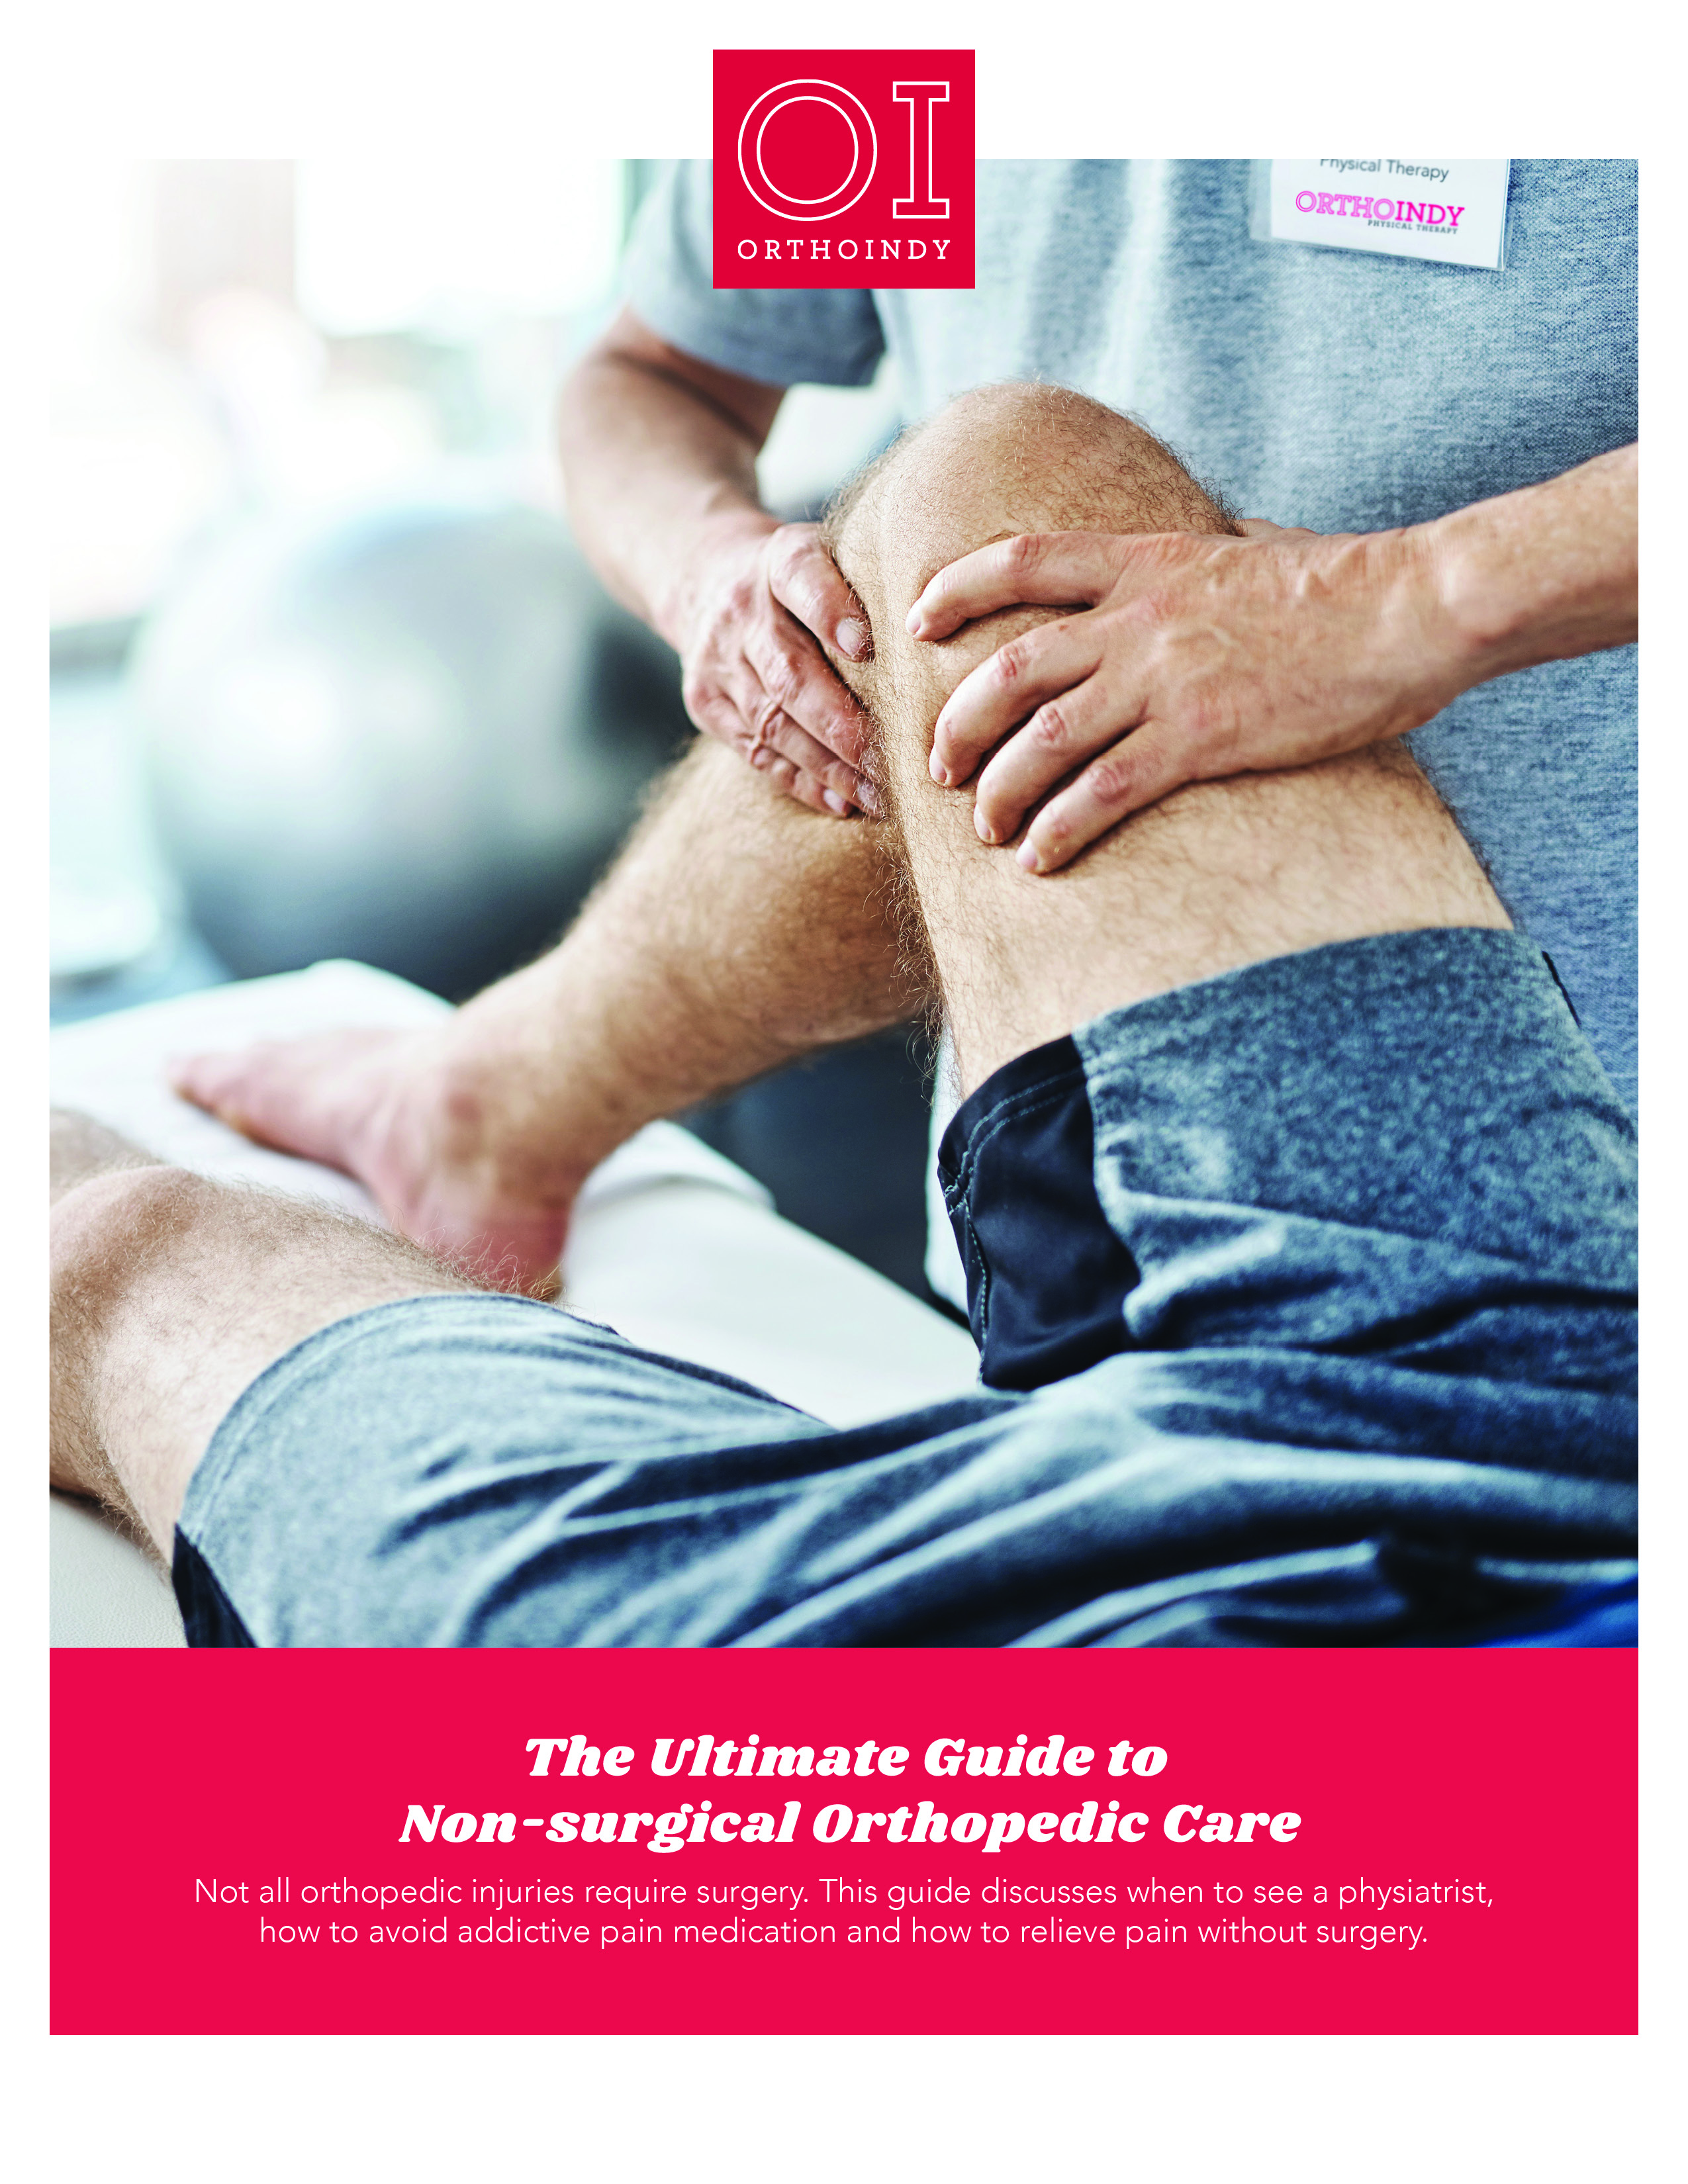 The ultimate guide to non-surgical orthopedic care